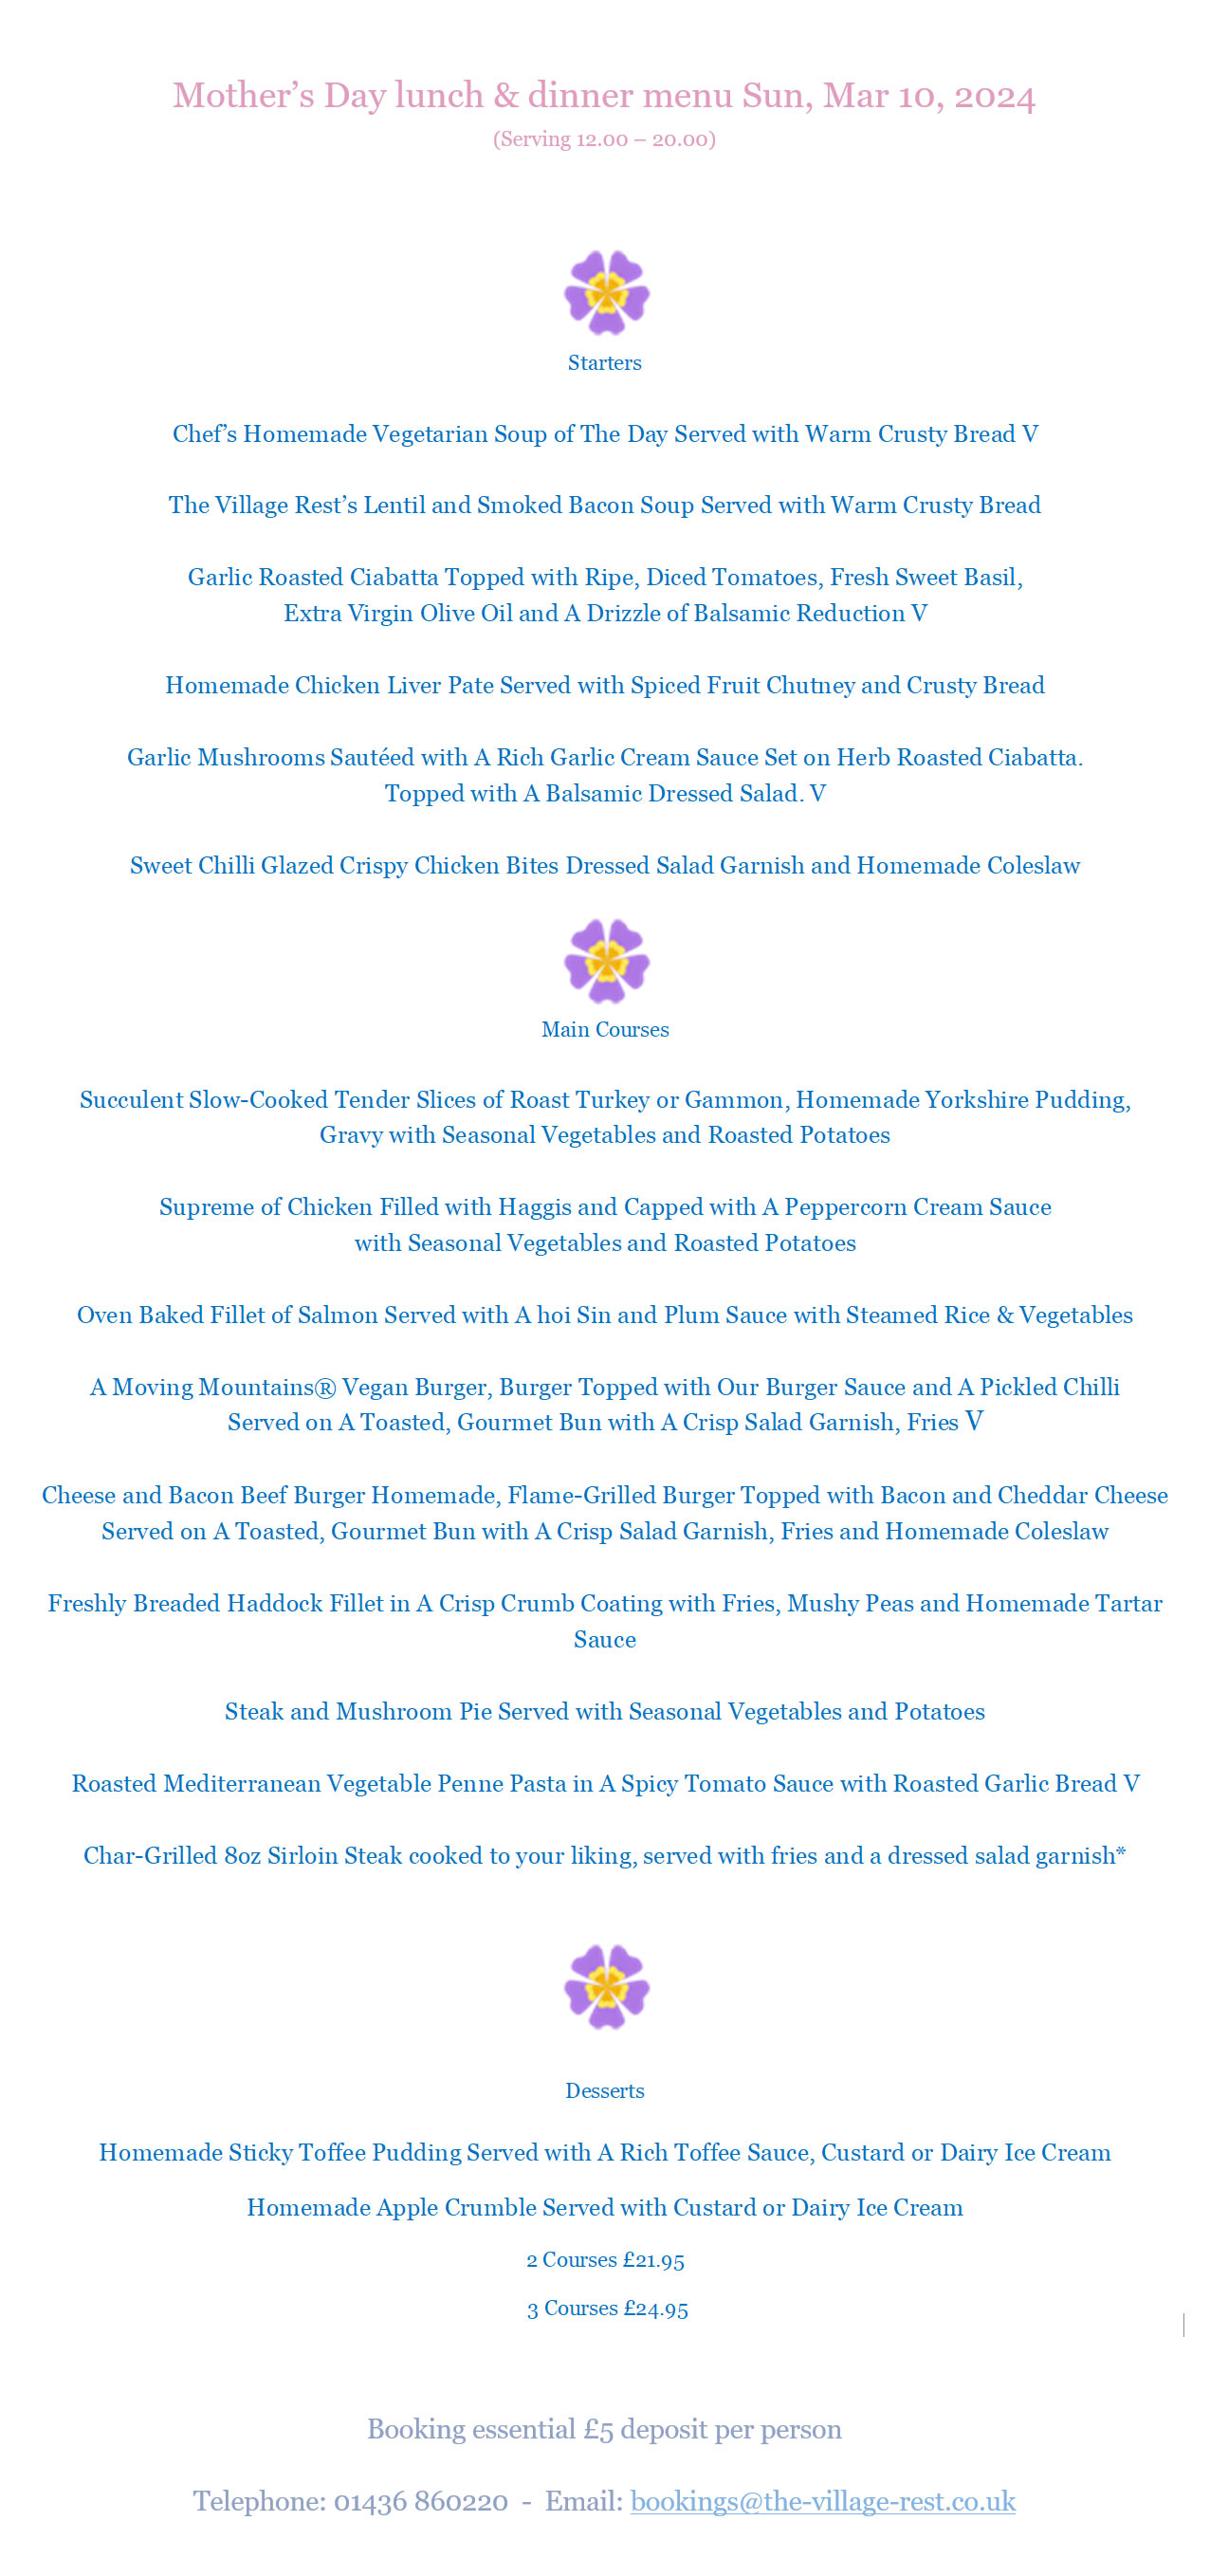 Mother's Day Menu 2024